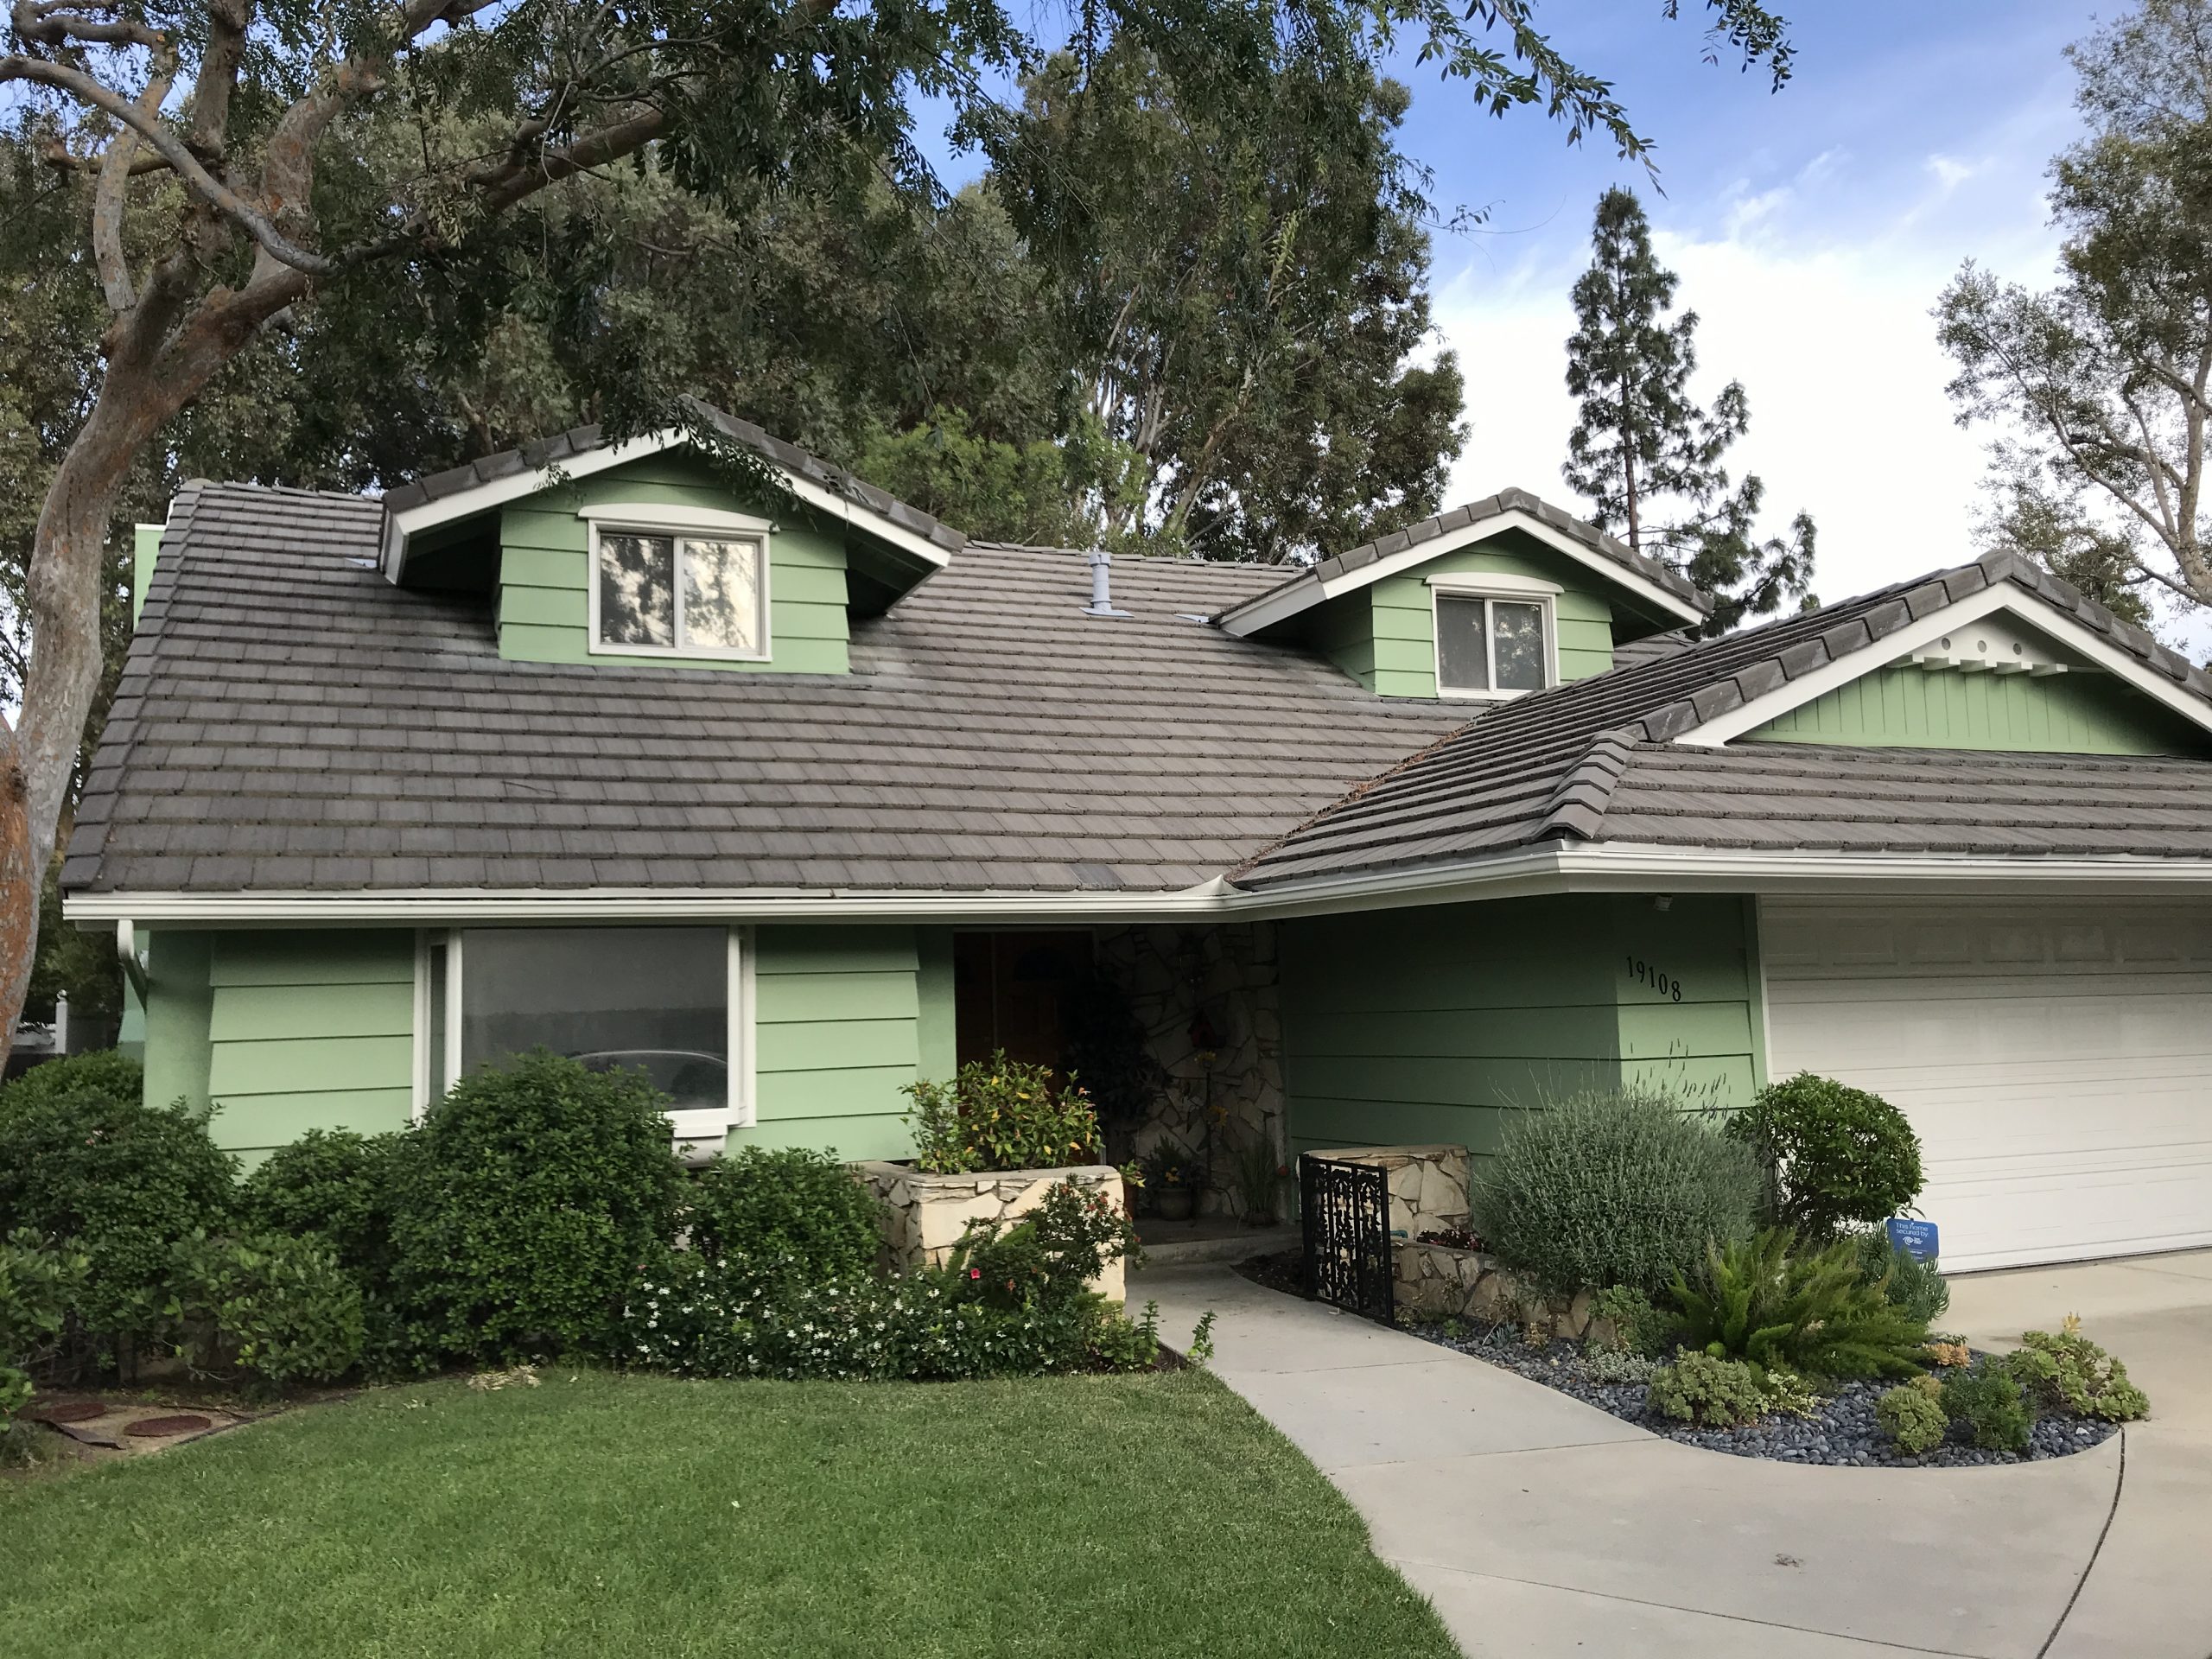 How Roofing Can Make My California Home Cooler in Summertime